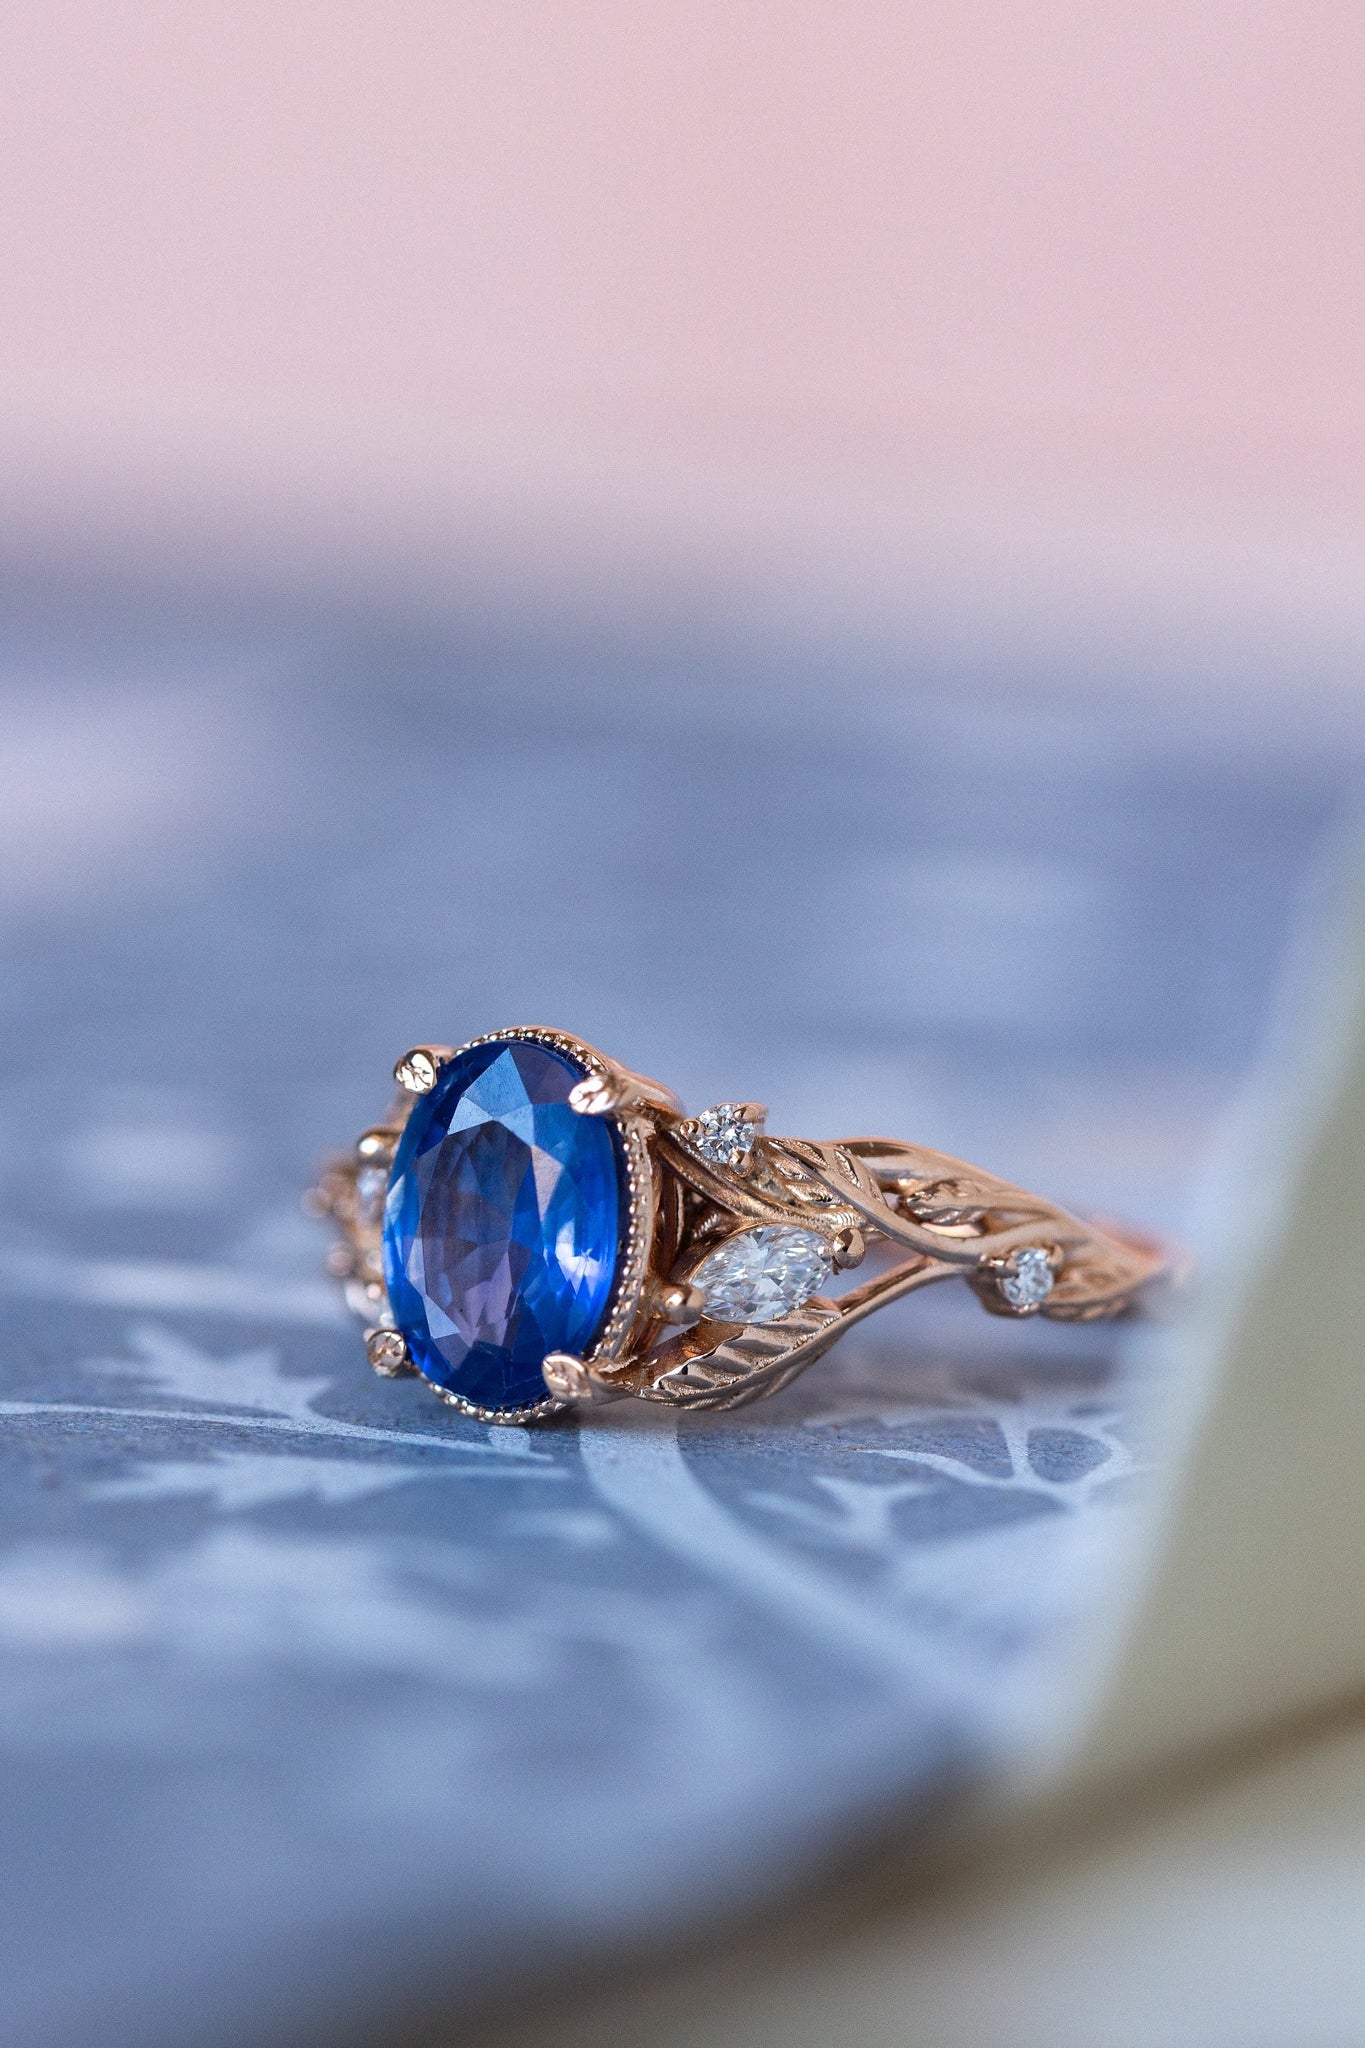 READY TO SHIP: Patricia ring in 14K rose/yellow/white gold, natural blue sapphire oval cut 8x6 mm, accent lab grown diamonds, AVAILABLE RING SIZES: 6-8US - Eden Garden Jewelry™